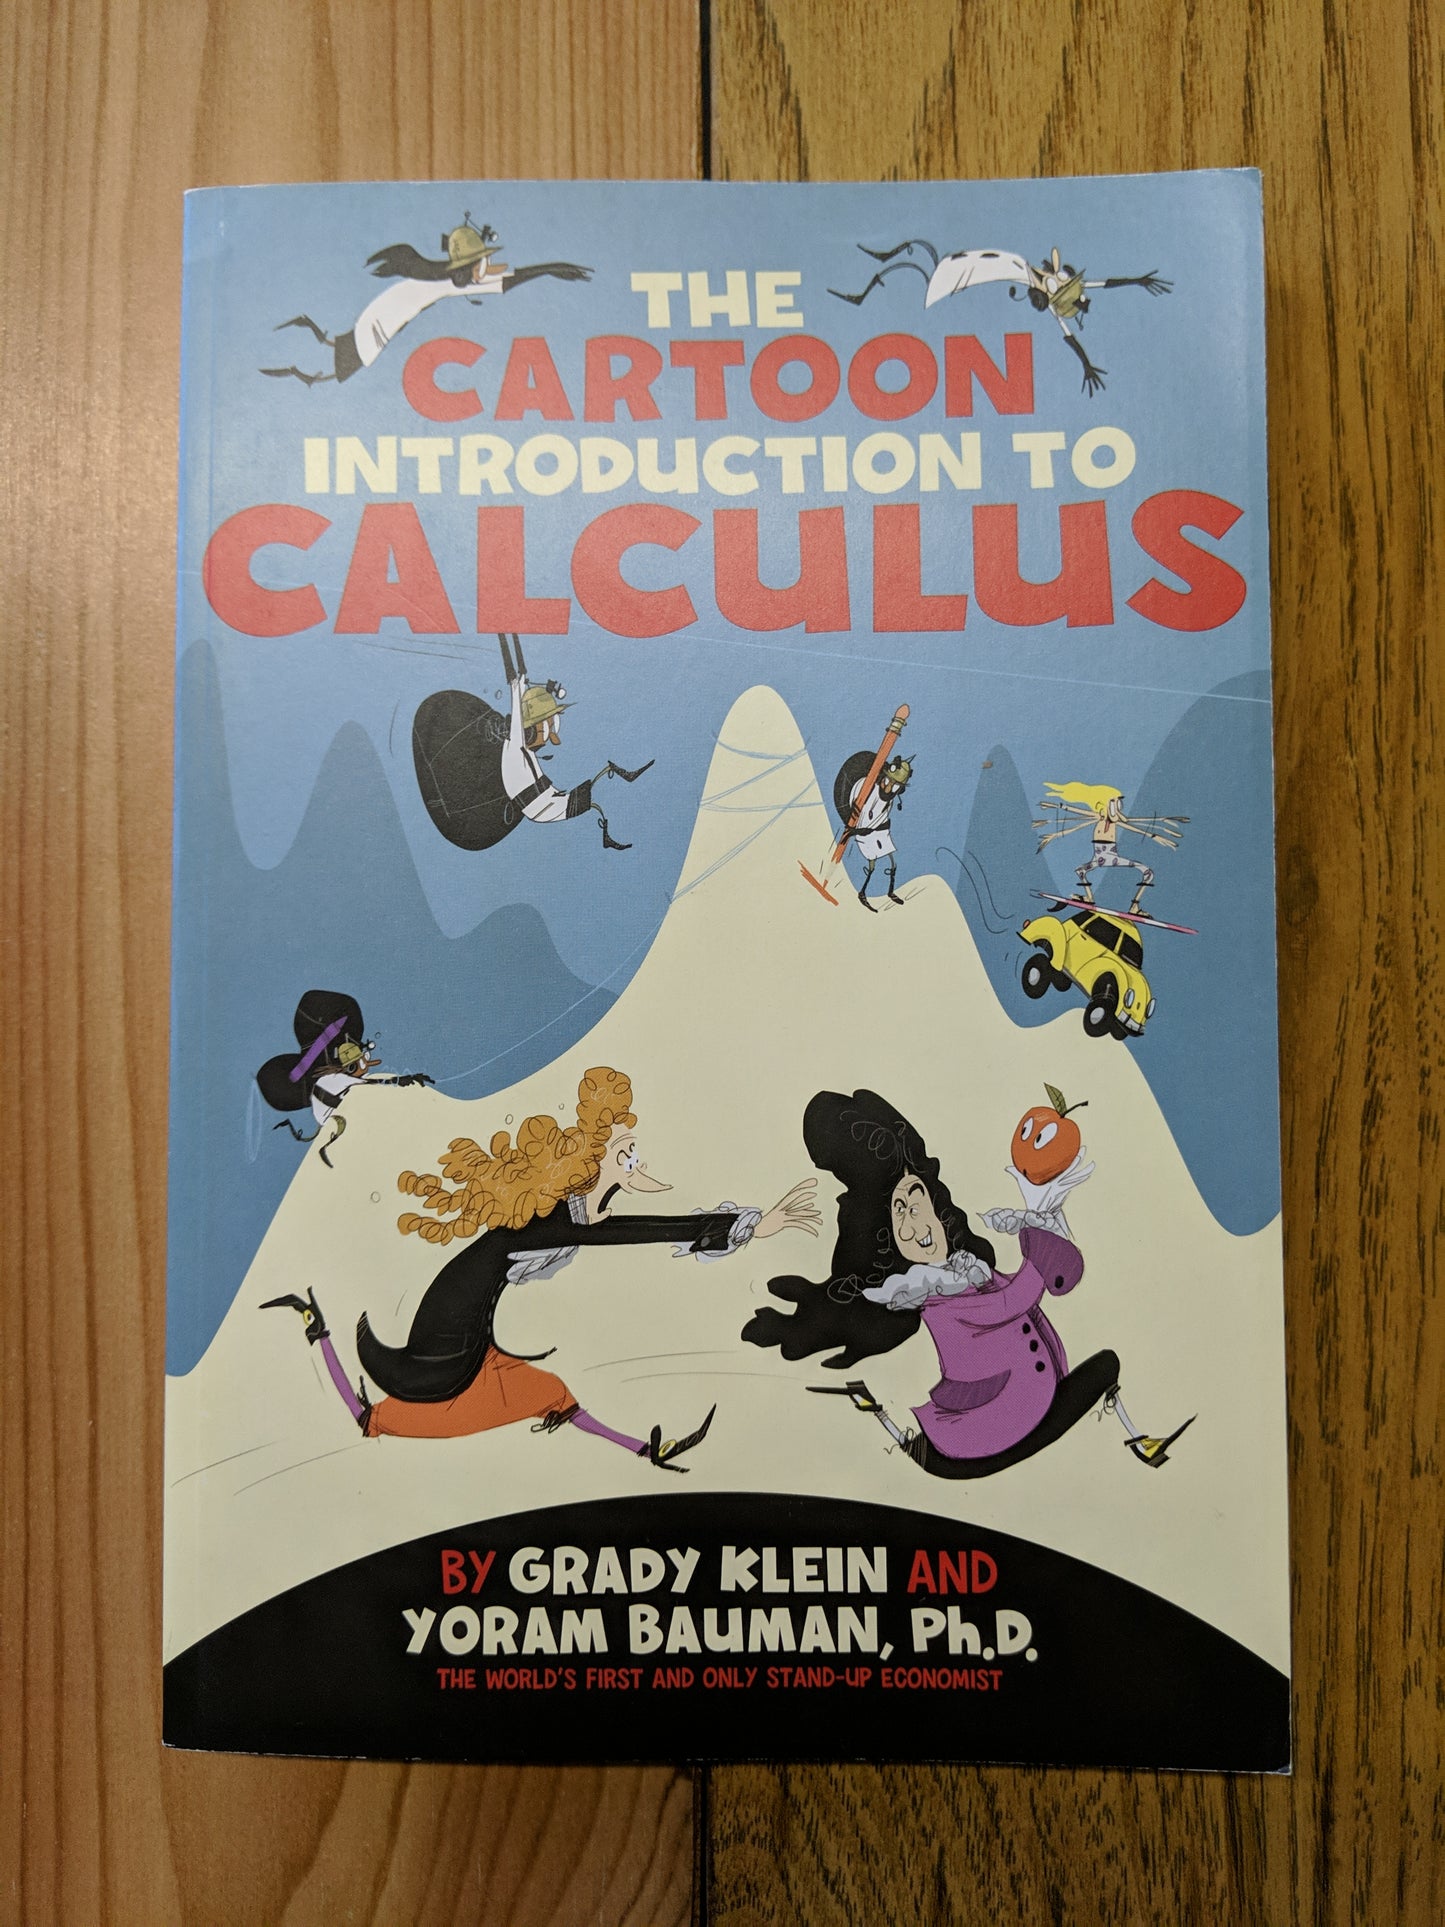 The Cartoon Introduction to Calculus